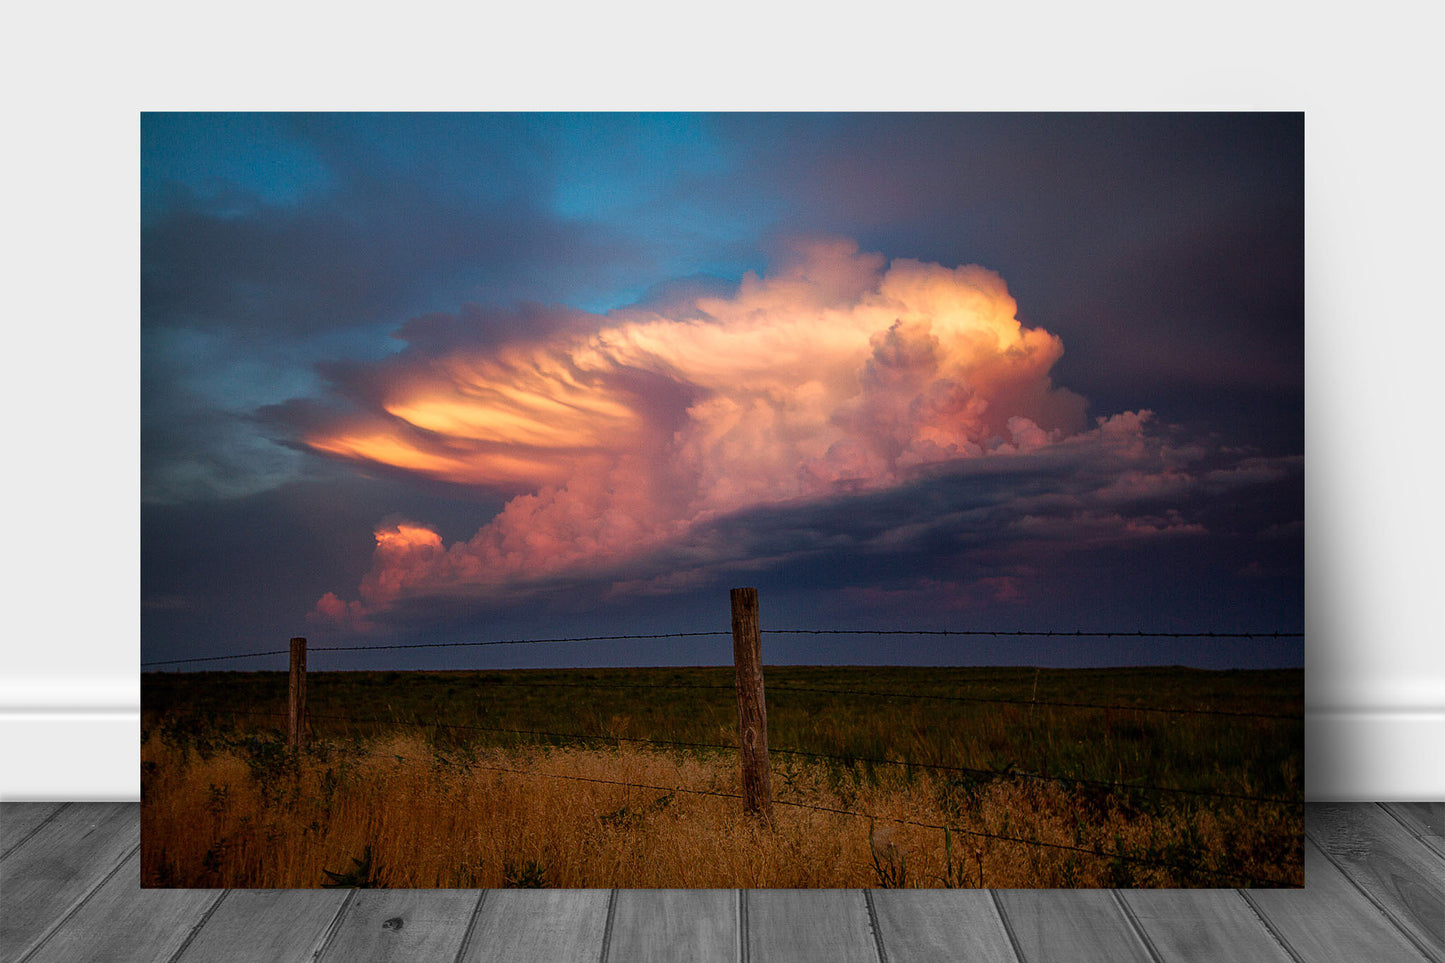 Storm metal print on aluminum of a supercell thunderstorm drenched in sunlight over a barbed wire fence at sunset on a stormy evening in Oklahoma by Sean Ramsey of Southern Plains Photography.